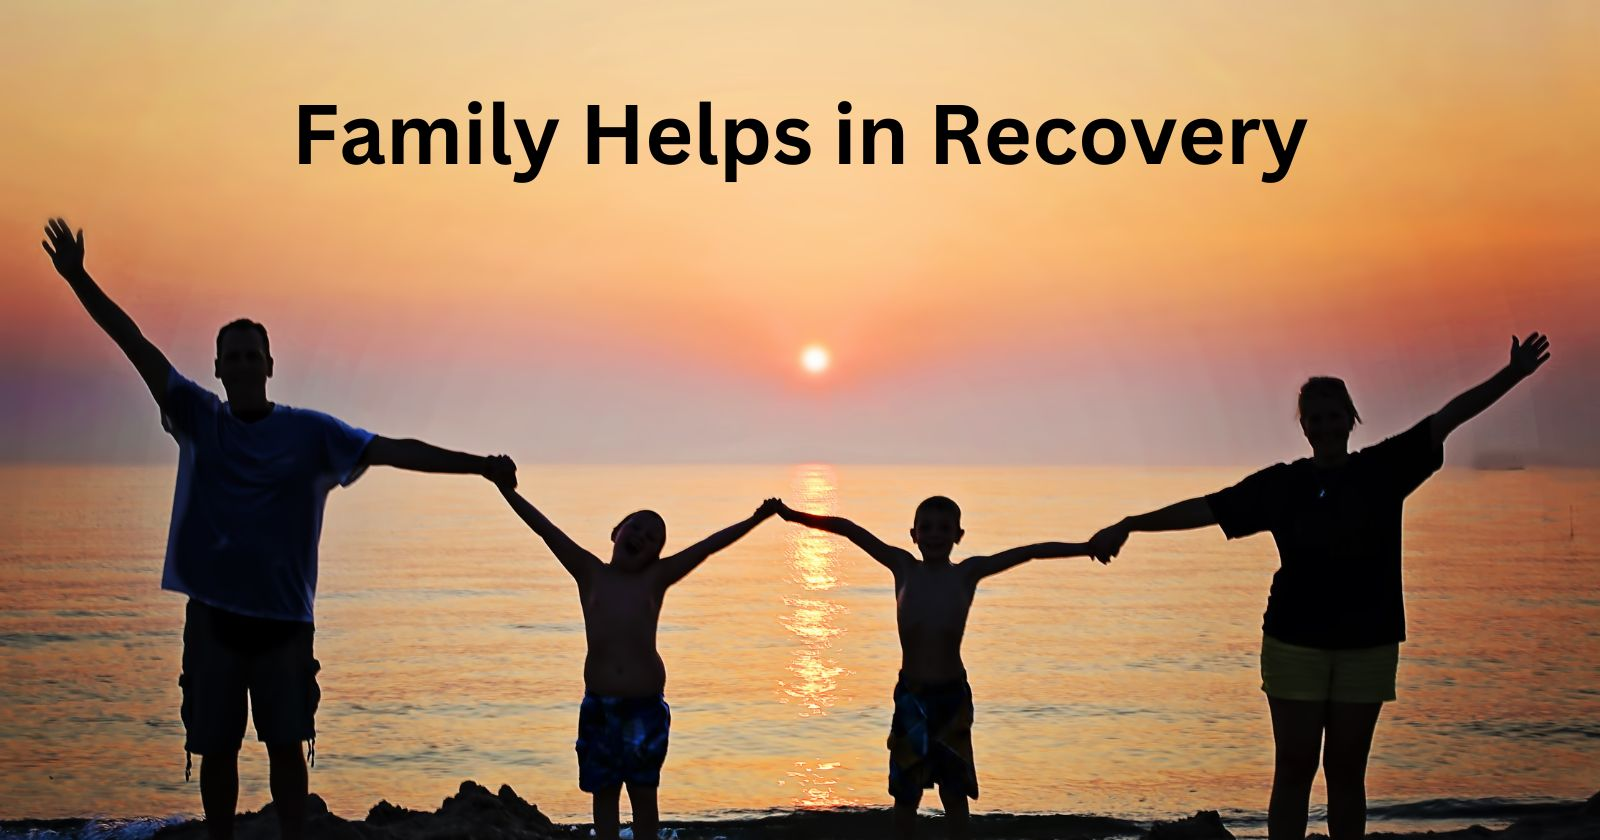 PTSD Family Support in Recovery

Mother, Father, Daughter and Son with hand in hand near sea